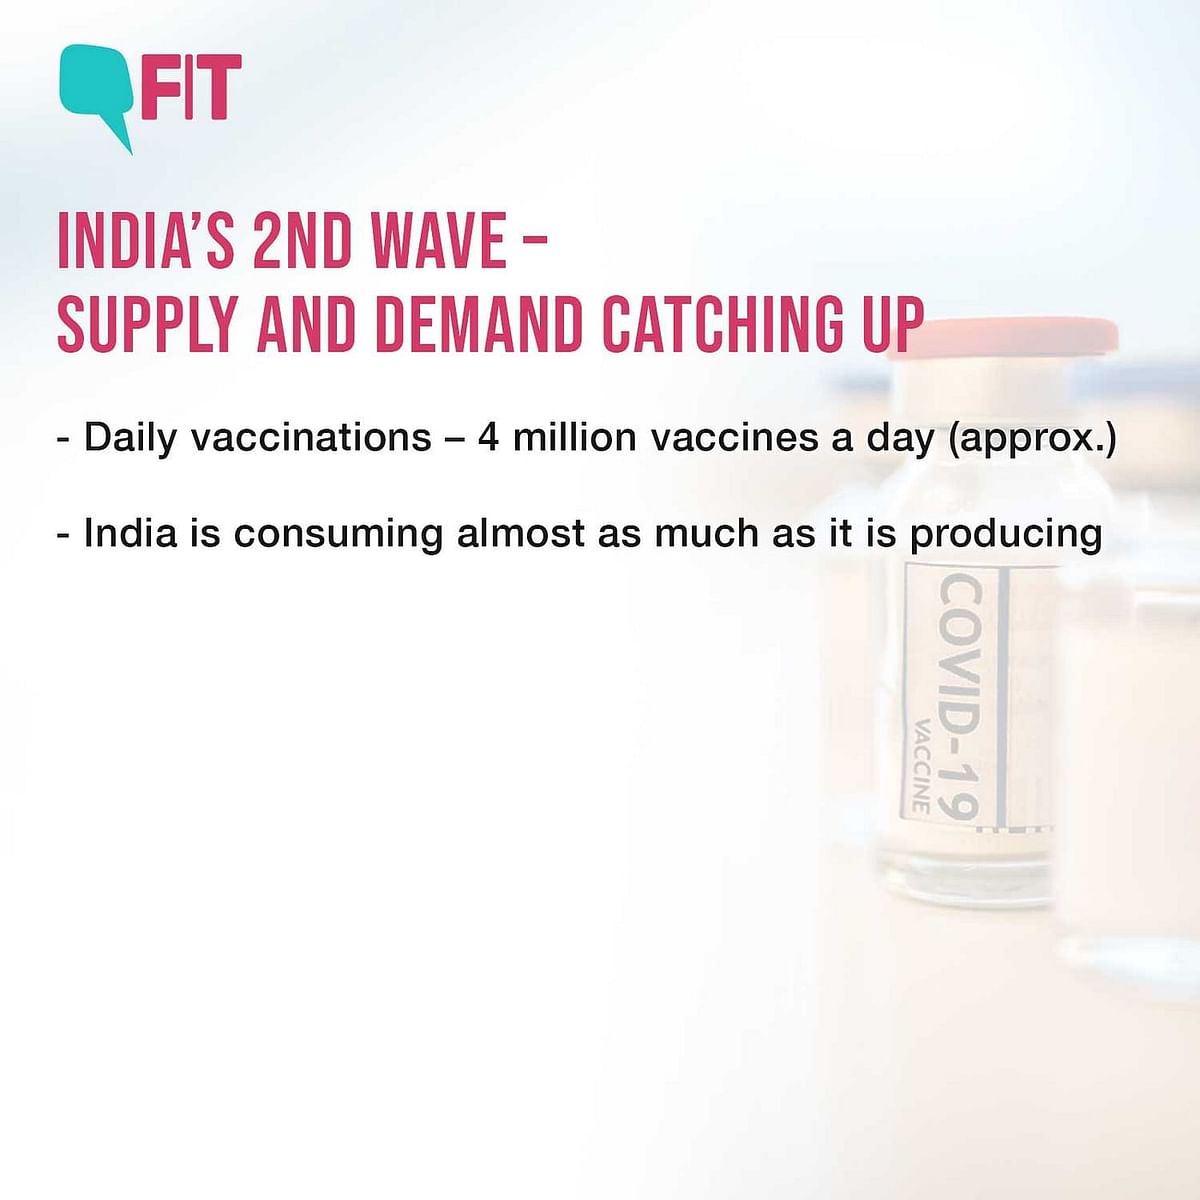 As India adds Sputnik V to its vaccine arsenal, what pool of vaccines does India have access to?